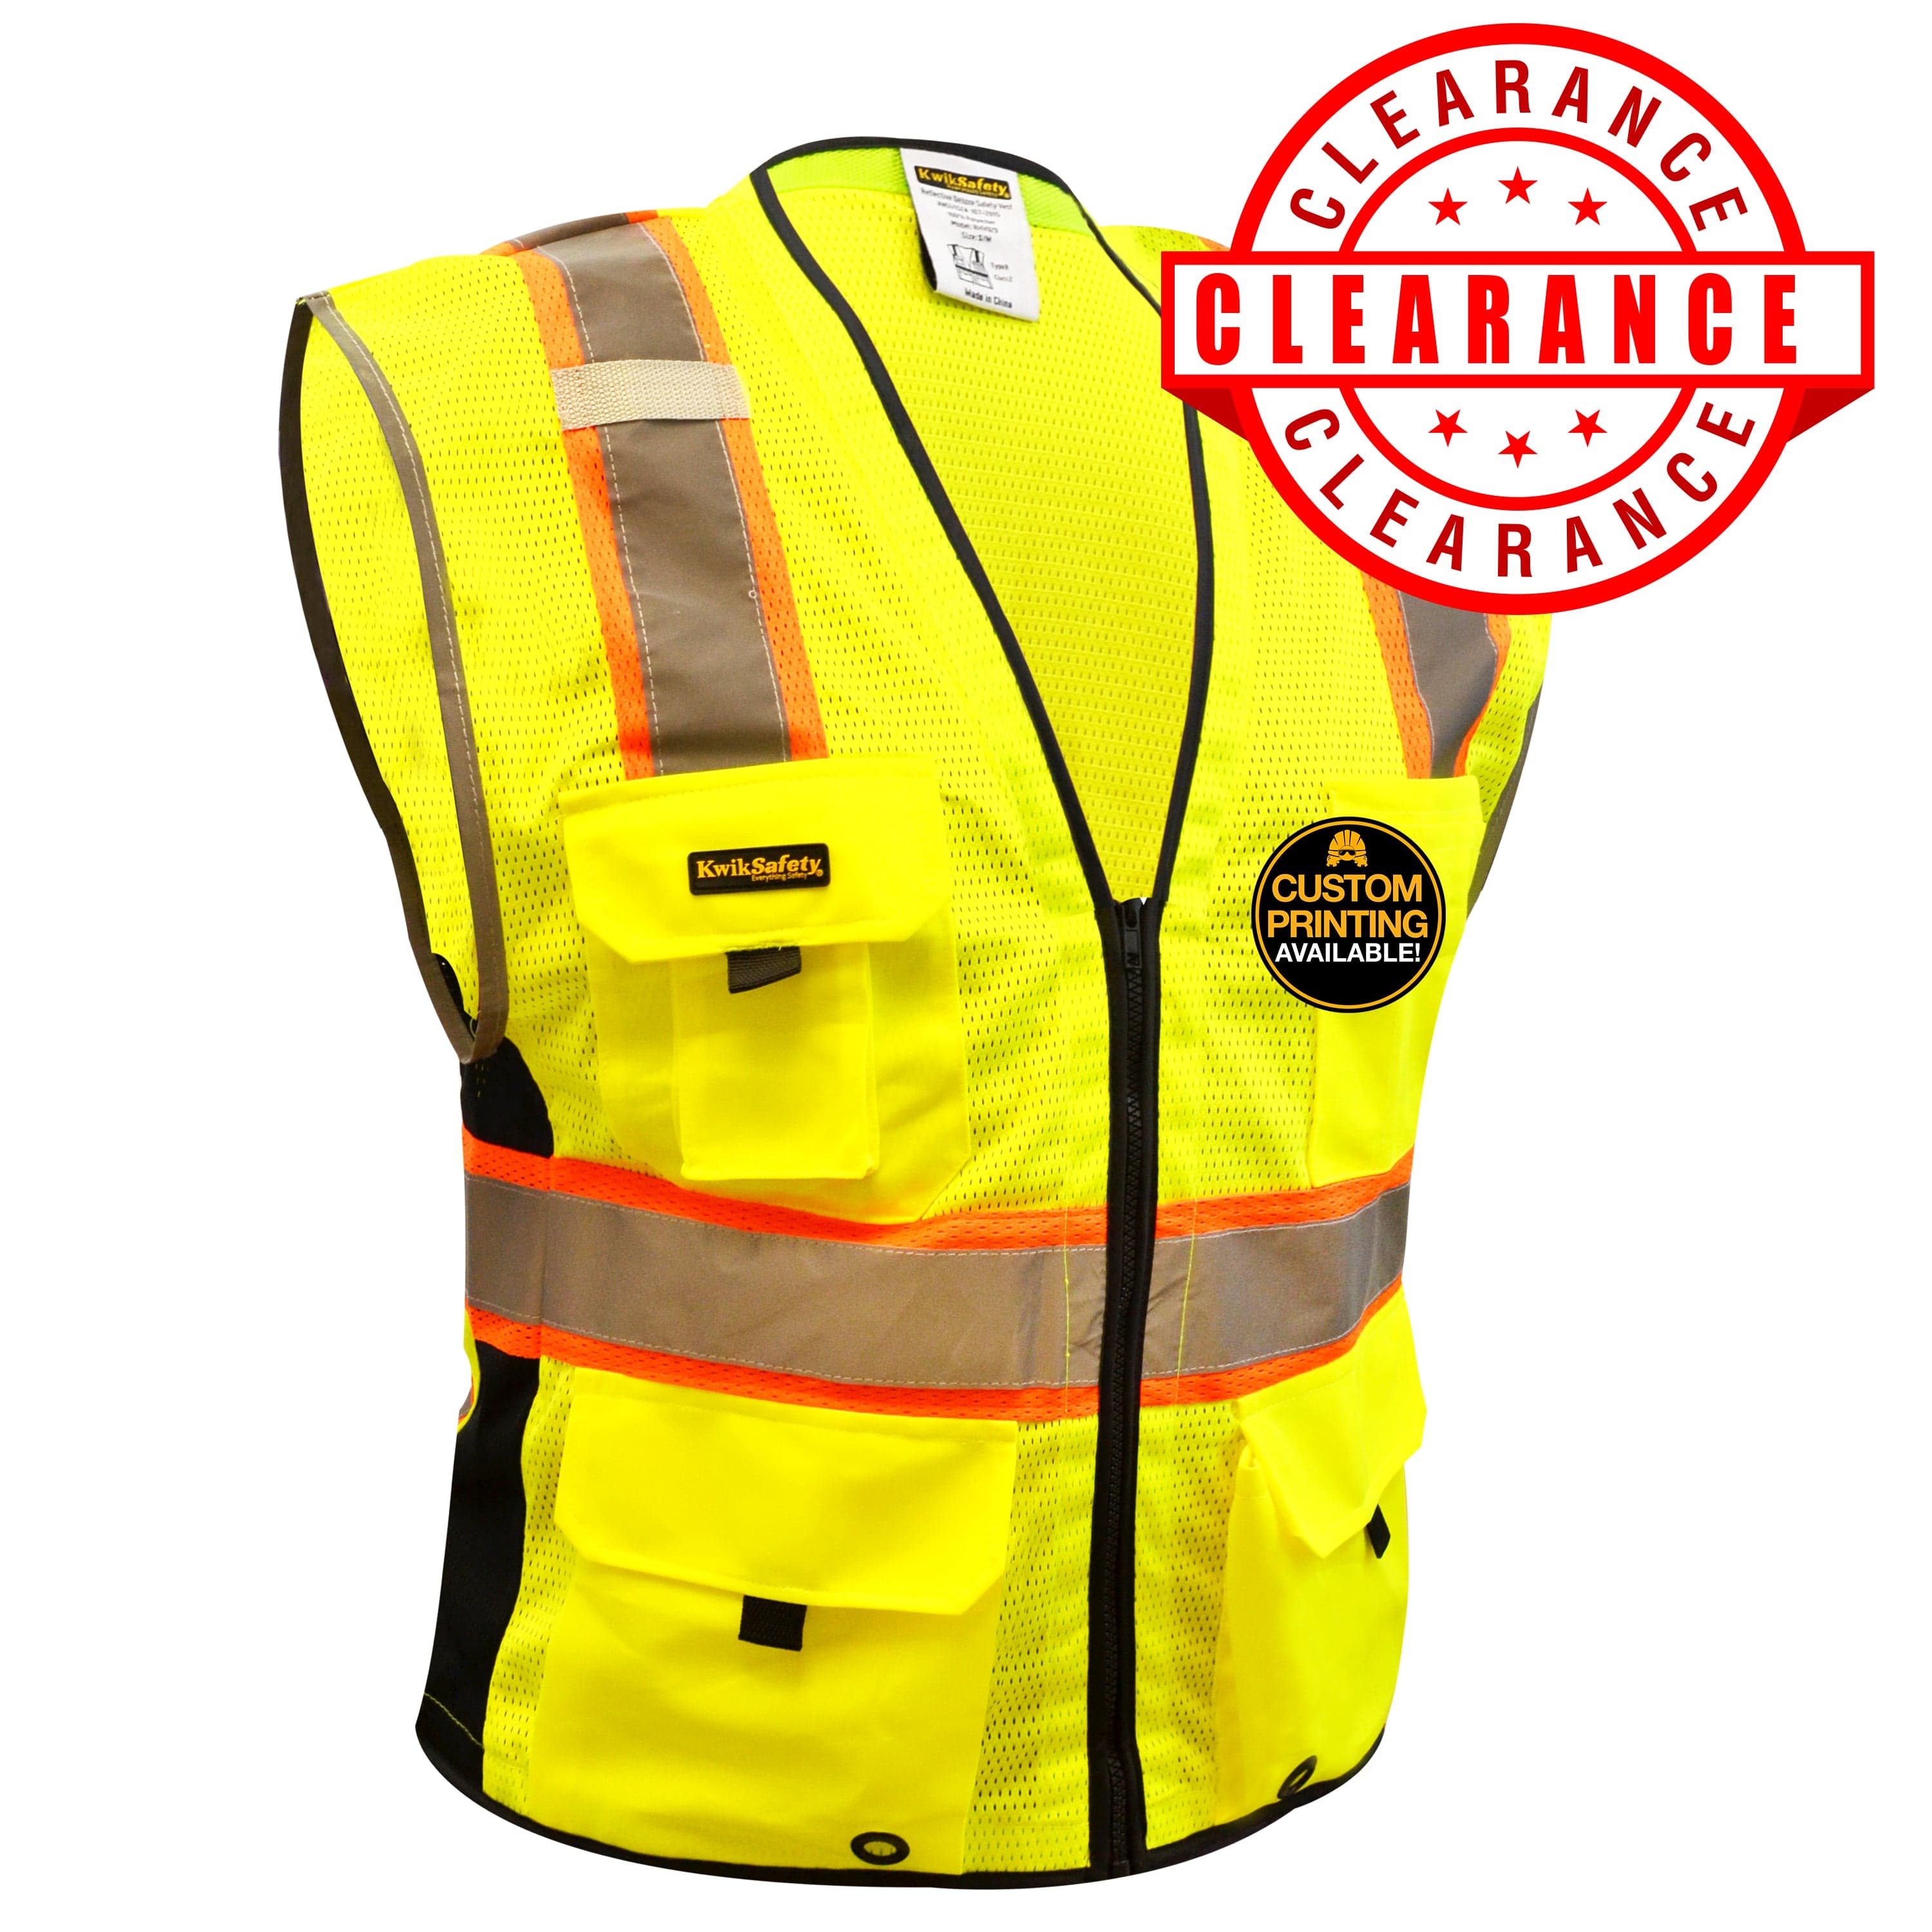 KwikSafety Class 2 Deluxe High Visibility Safety Vest, Yellow, Size - Small/Medium